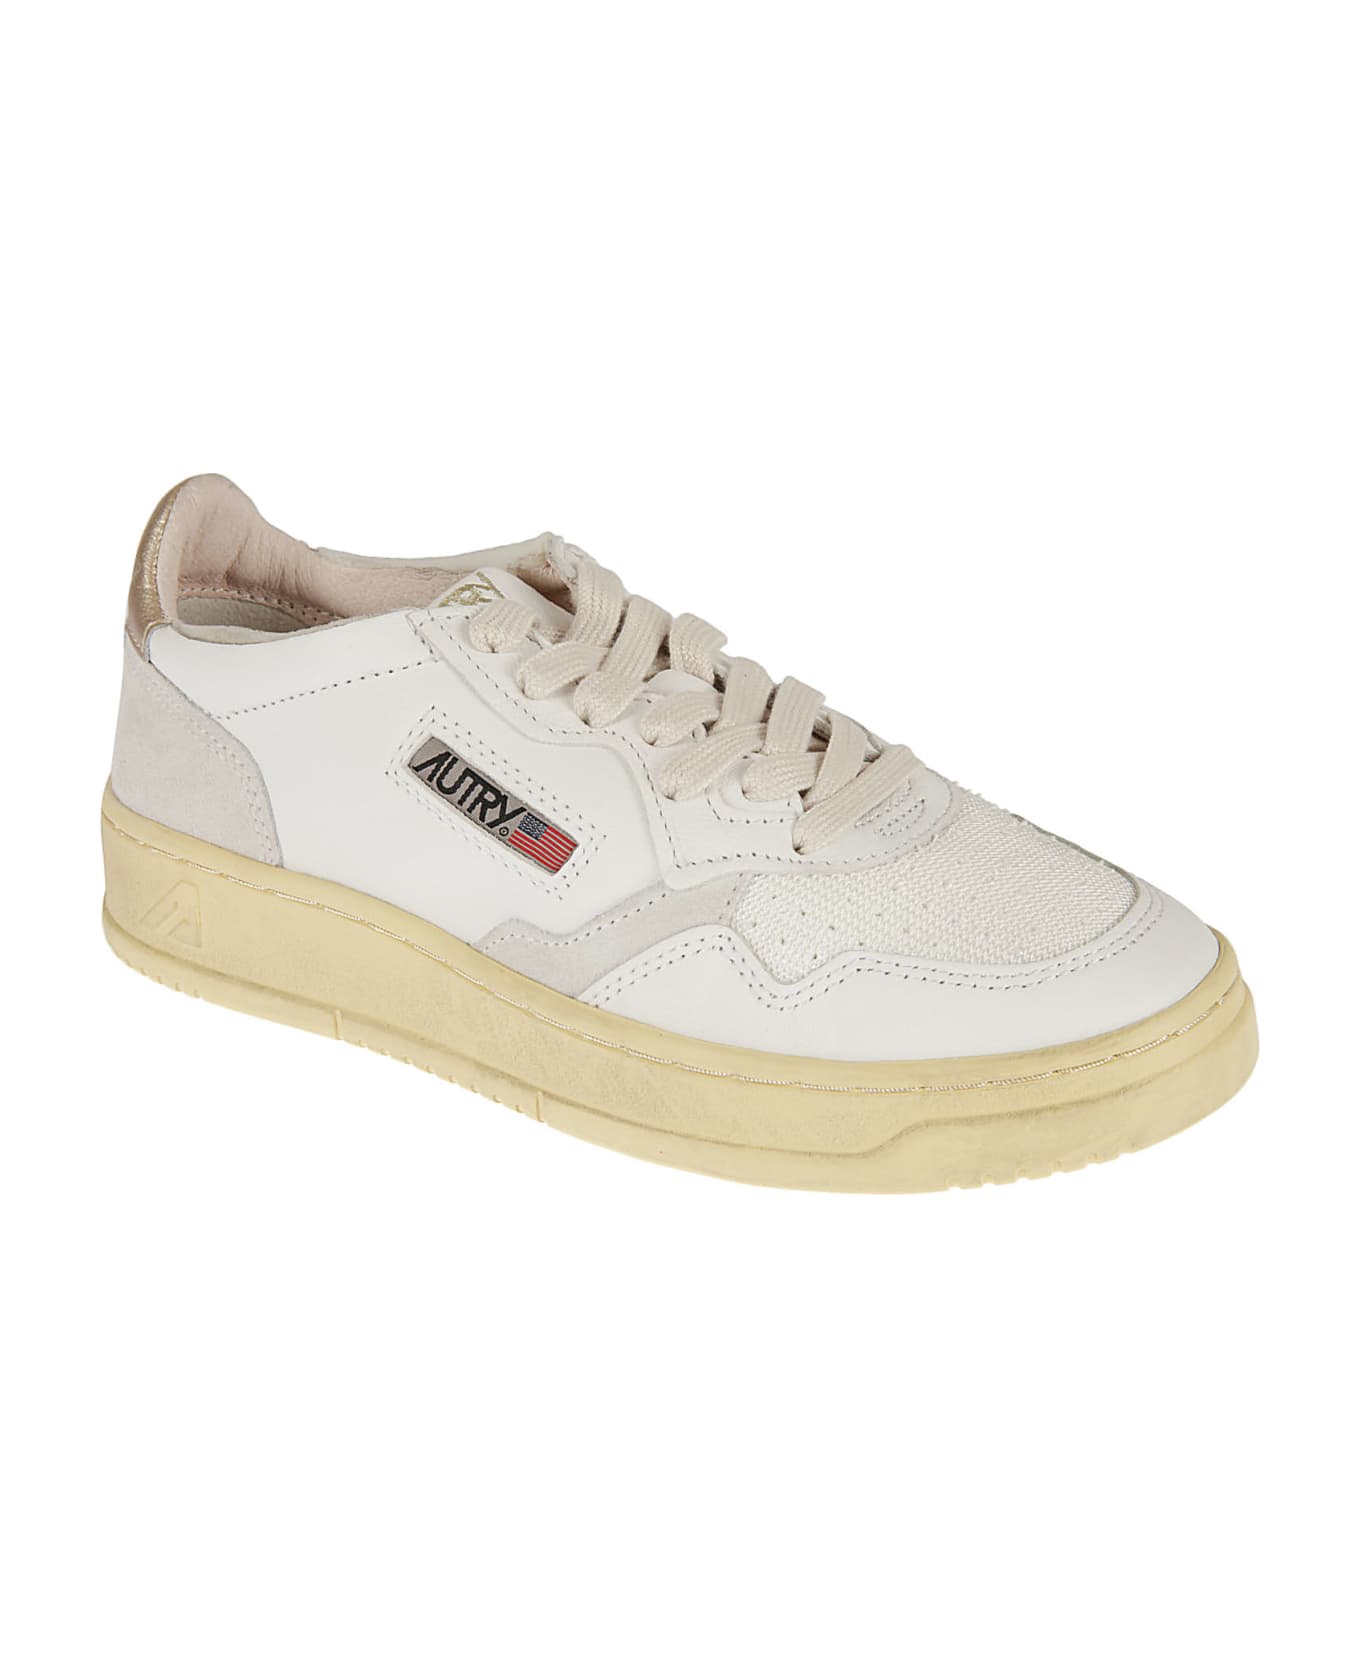 Autry Logo Patched Sneakers - White